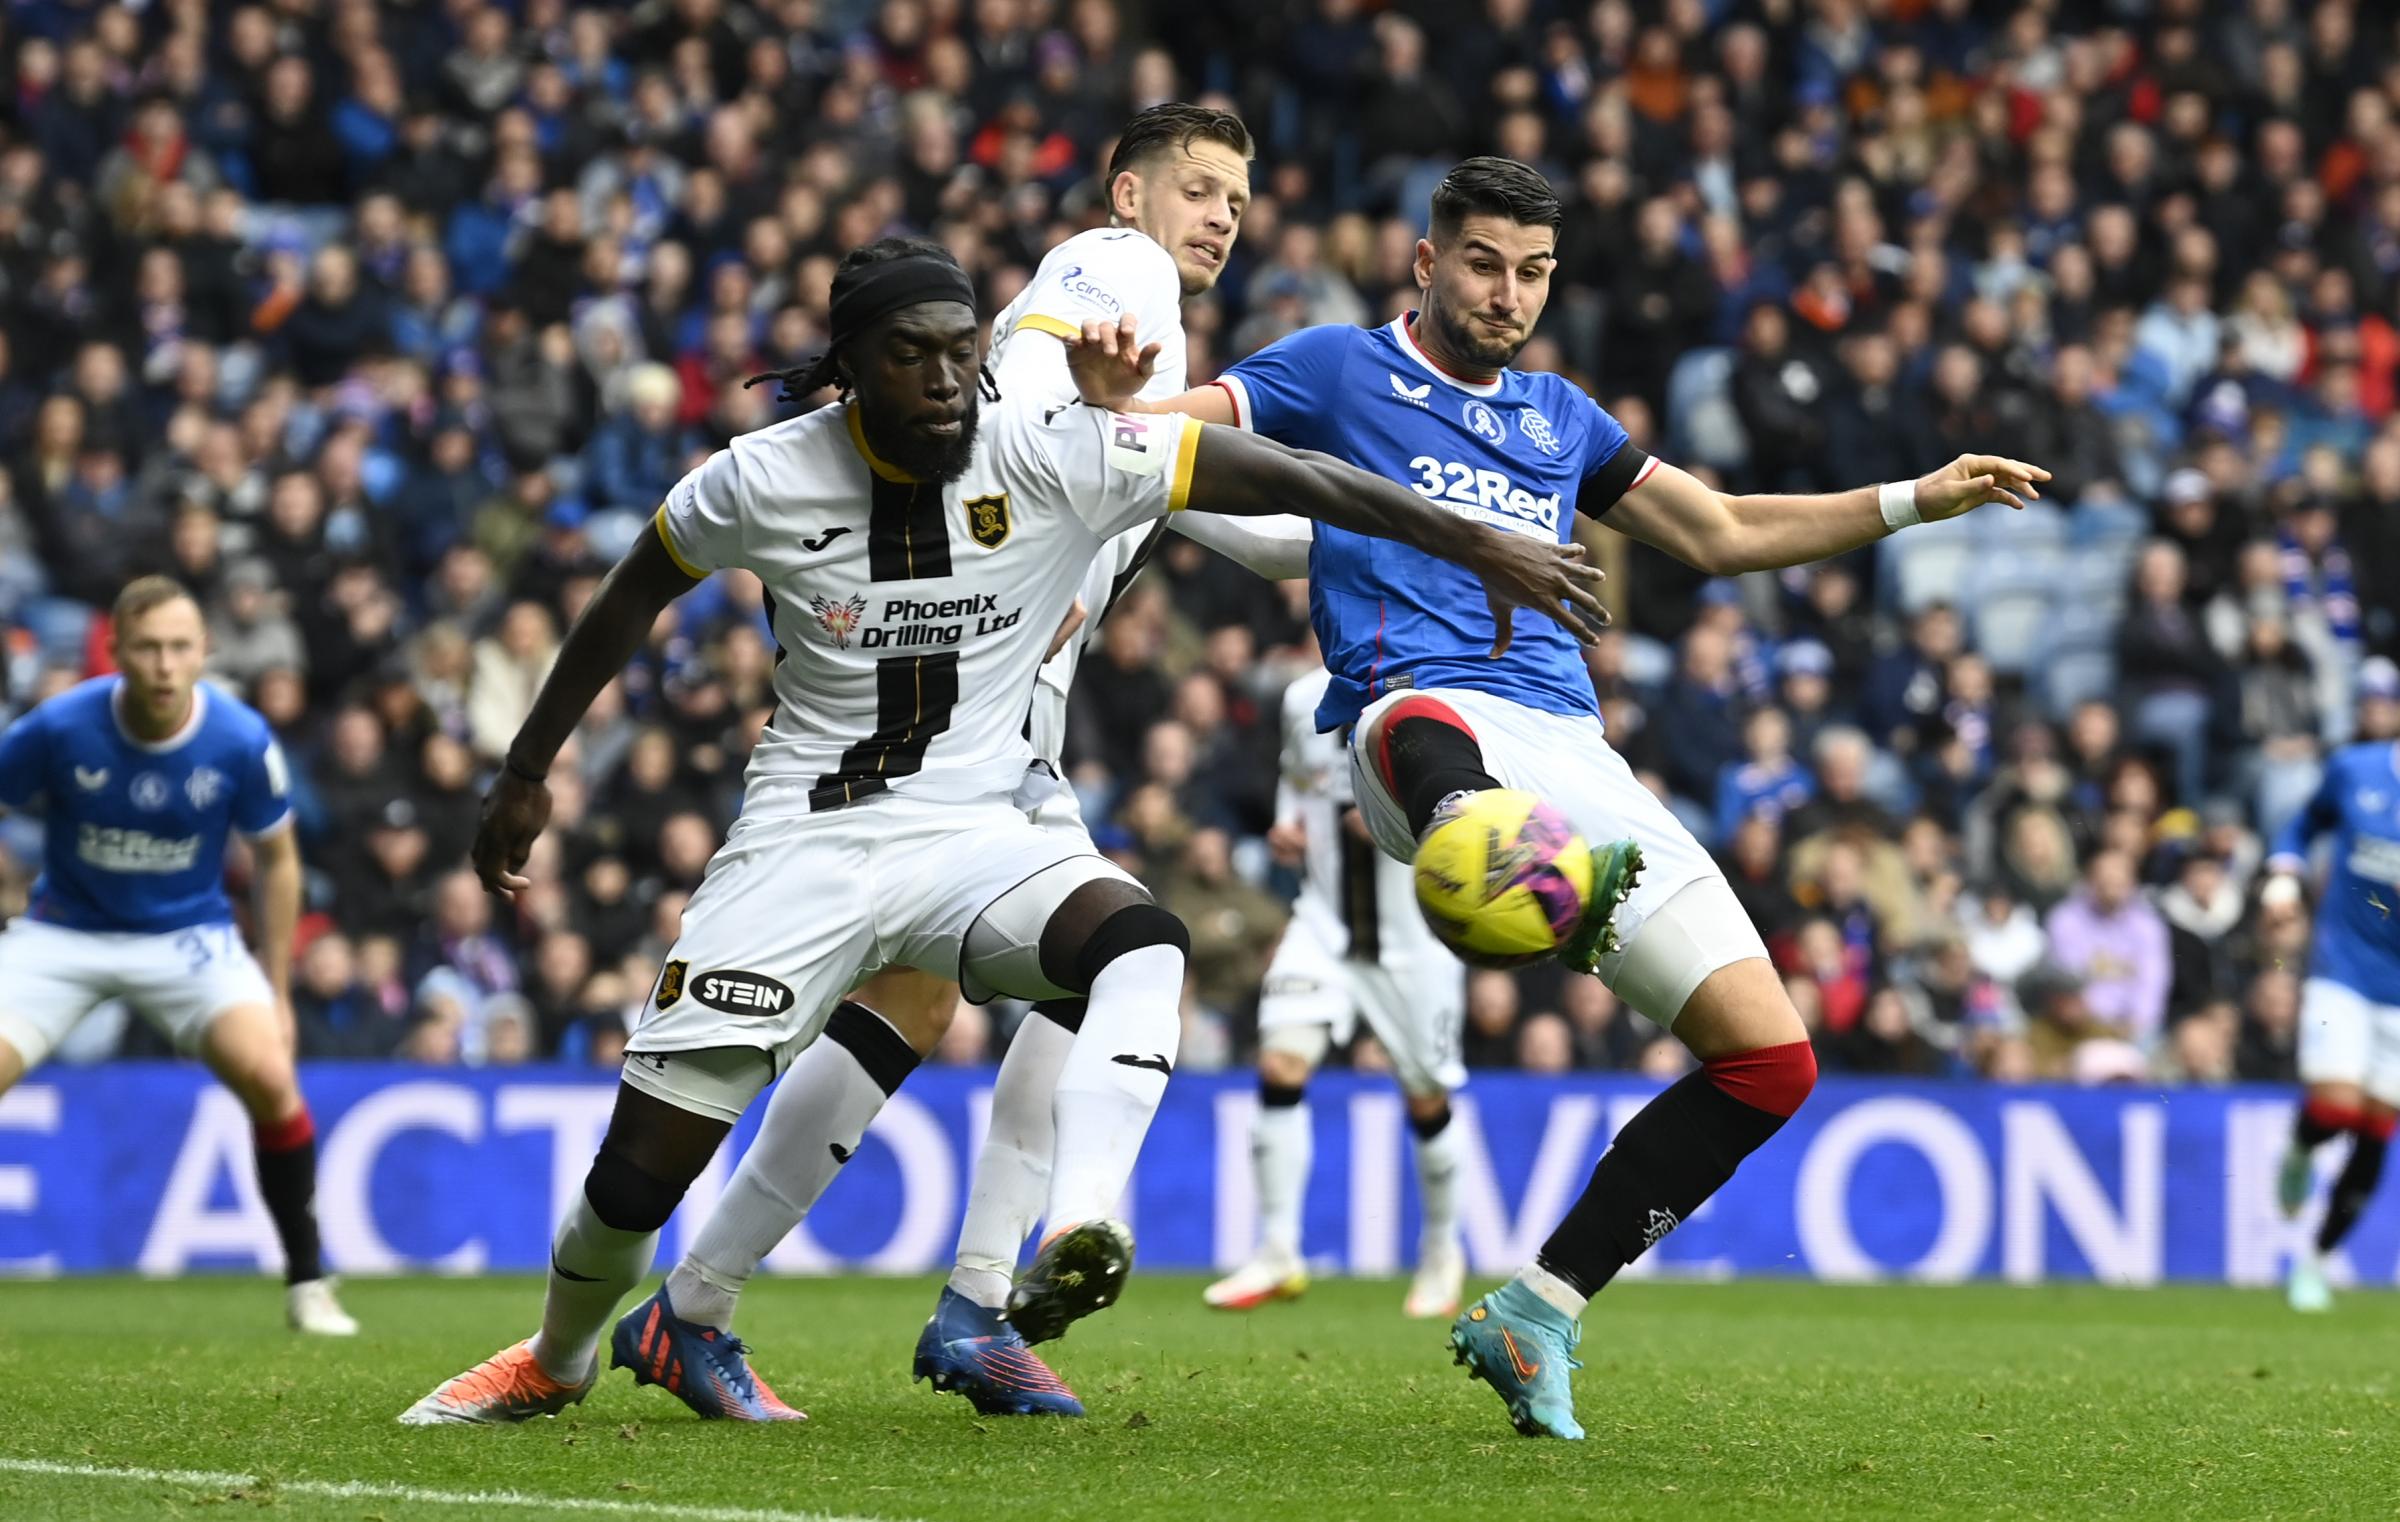 Livingston vs Rangers: Live stream, TV channel and kick-off time